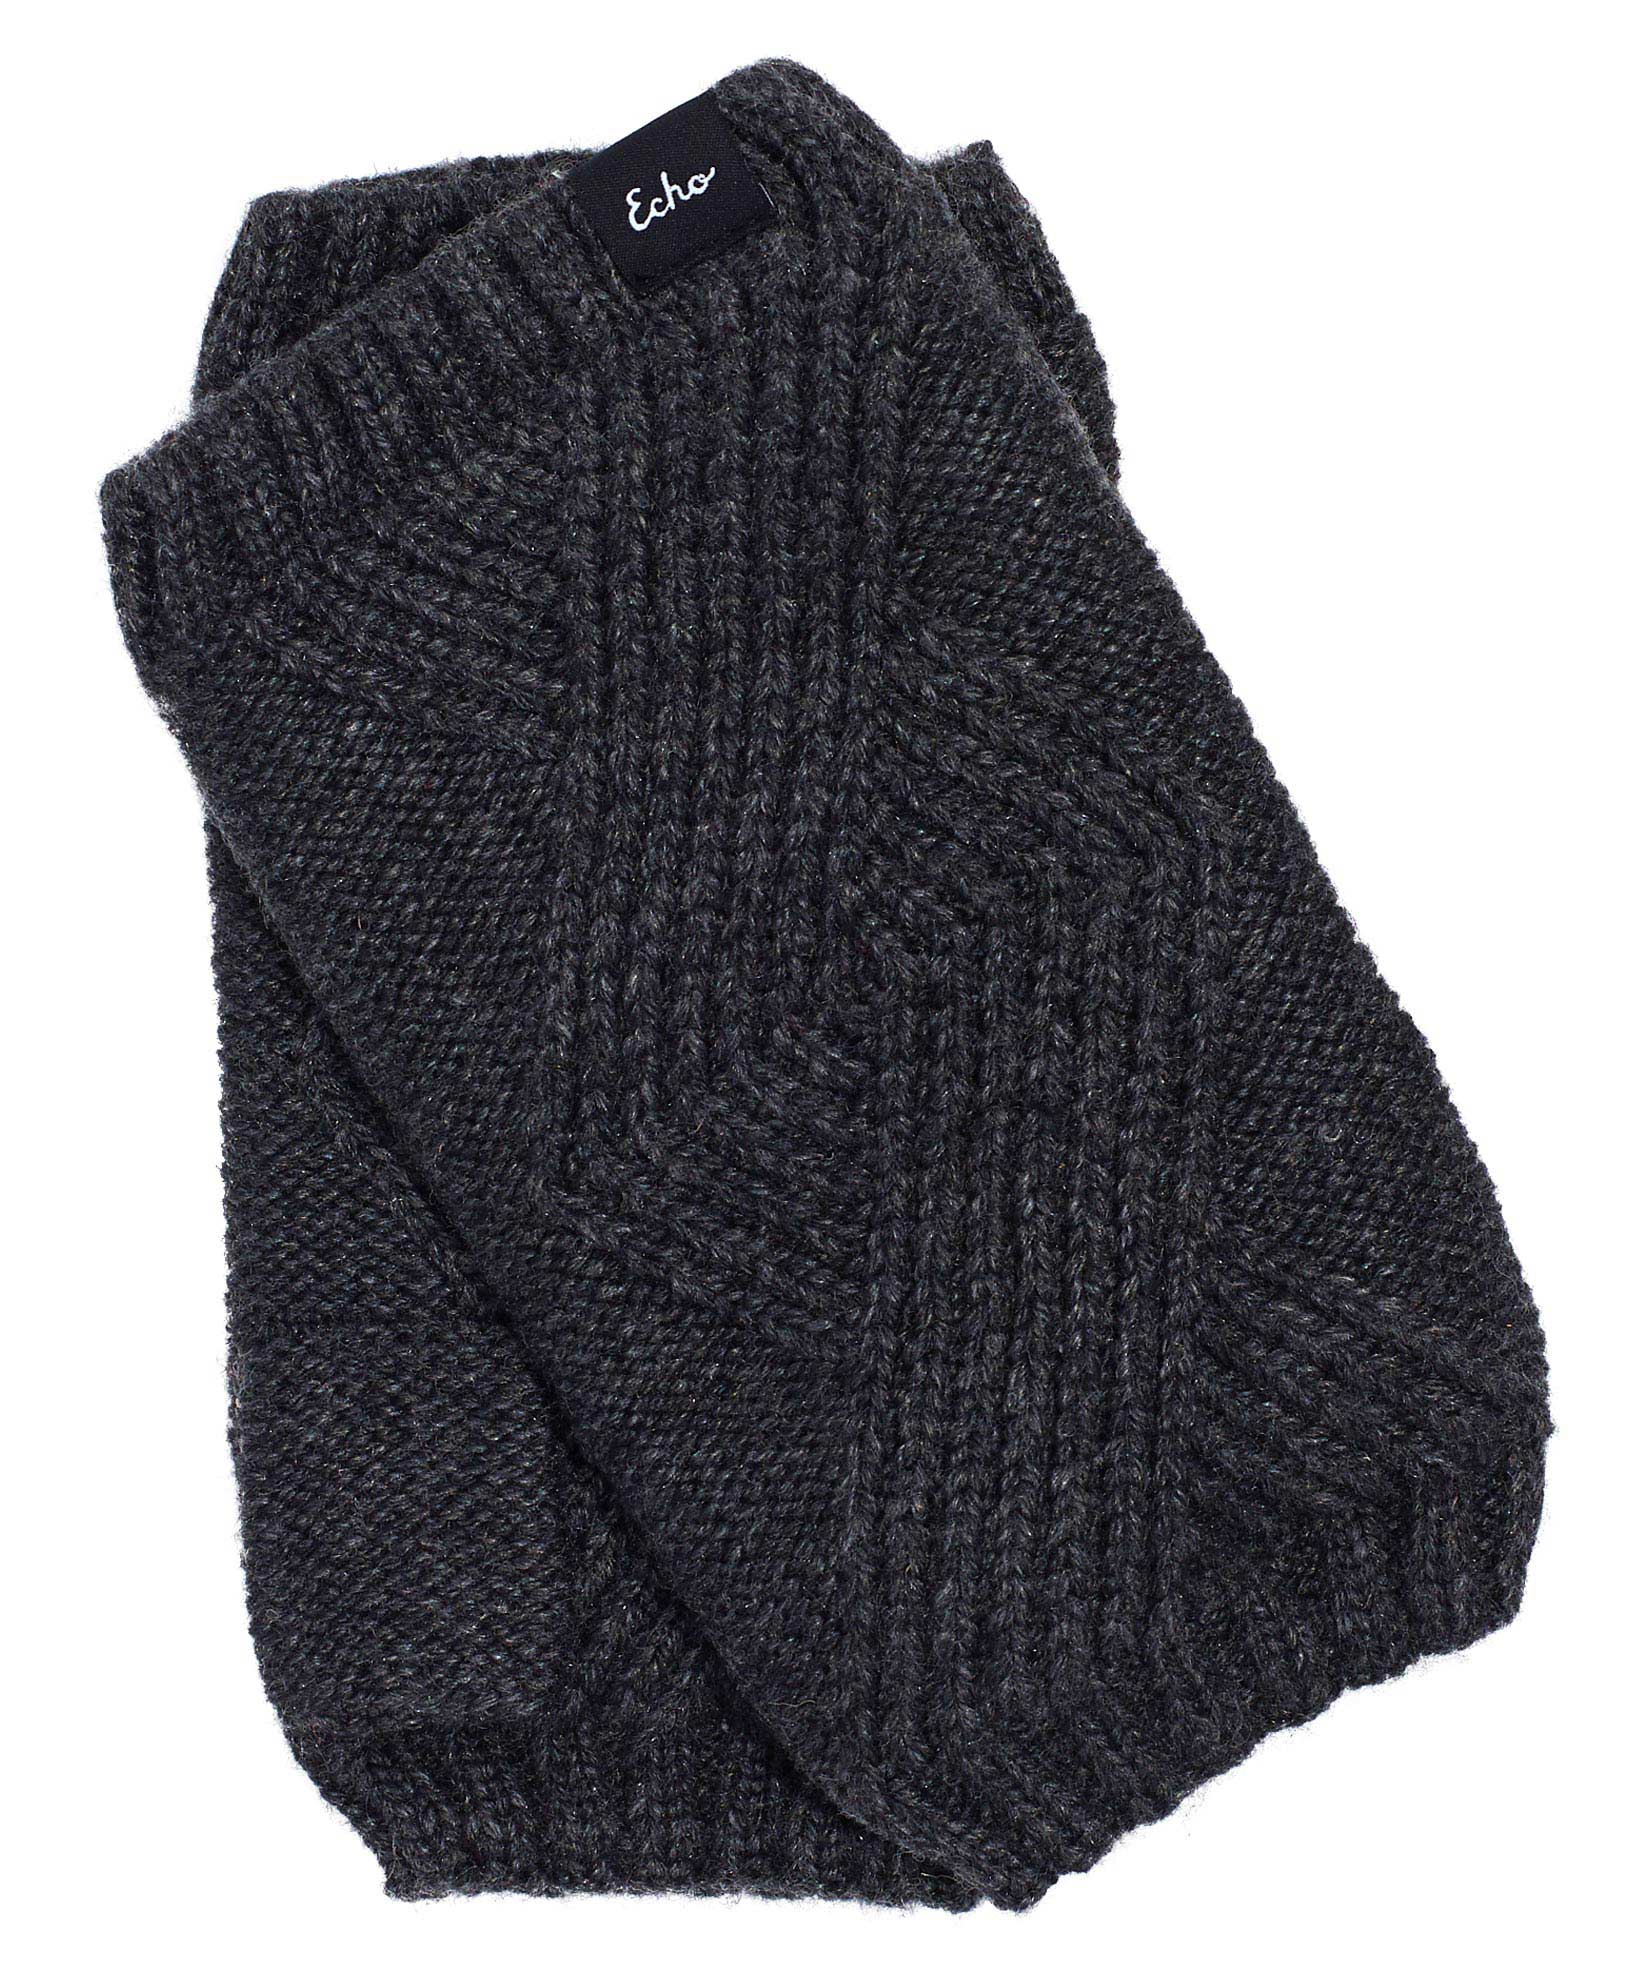 Recycled Cable Fingerless Glove in color Charcoal